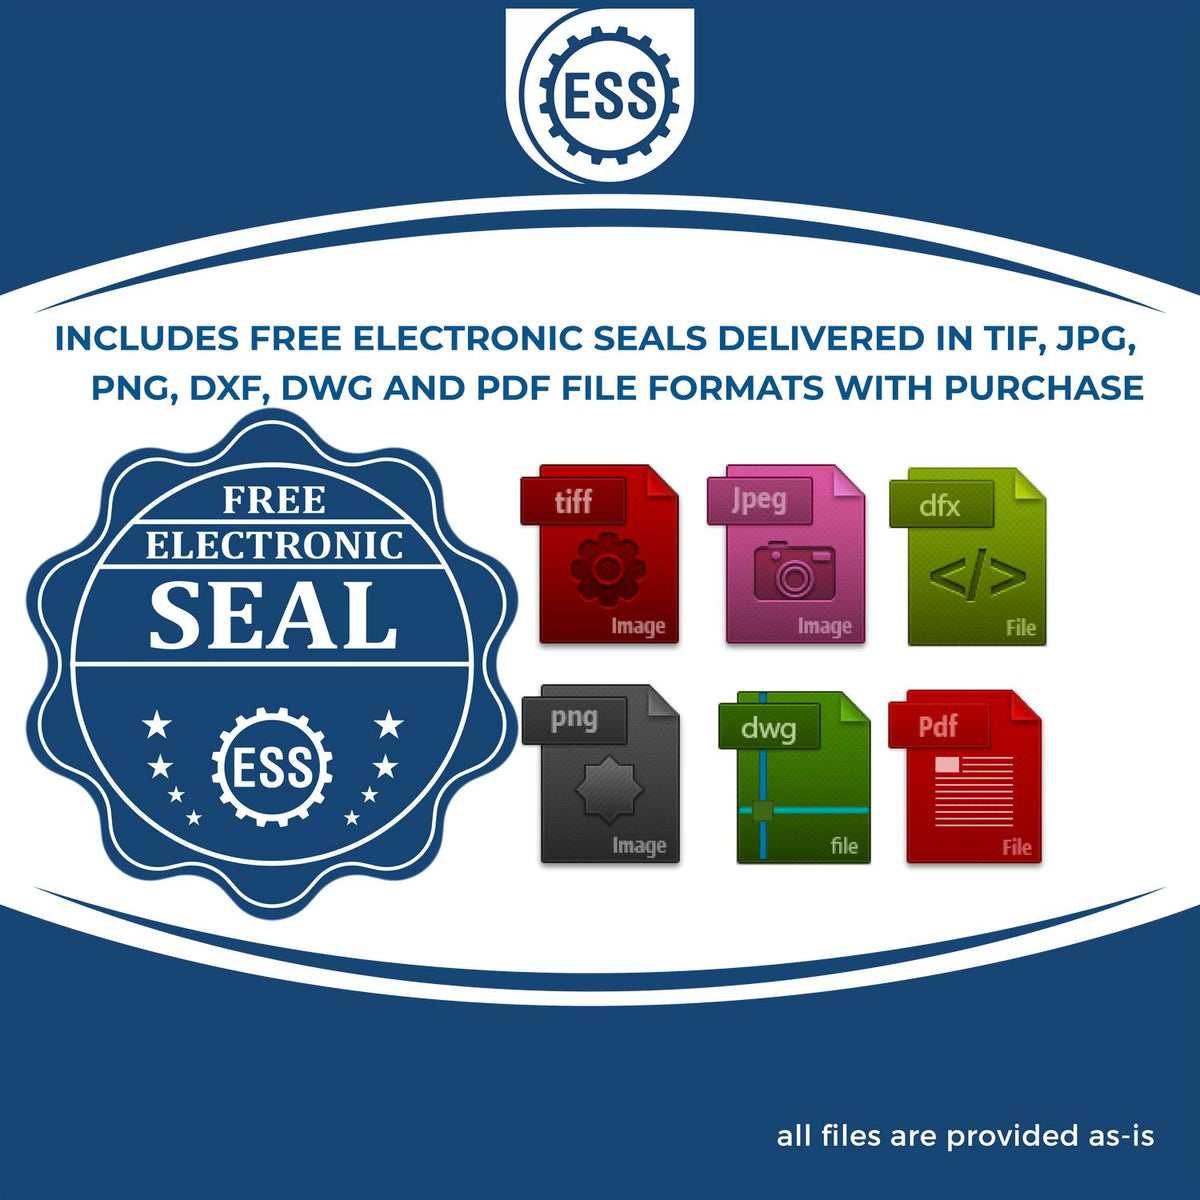 An infographic for the free electronic seal for the Long Reach Indiana PE Seal illustrating the different file type icons such as DXF, DWG, TIF, JPG and PNG.